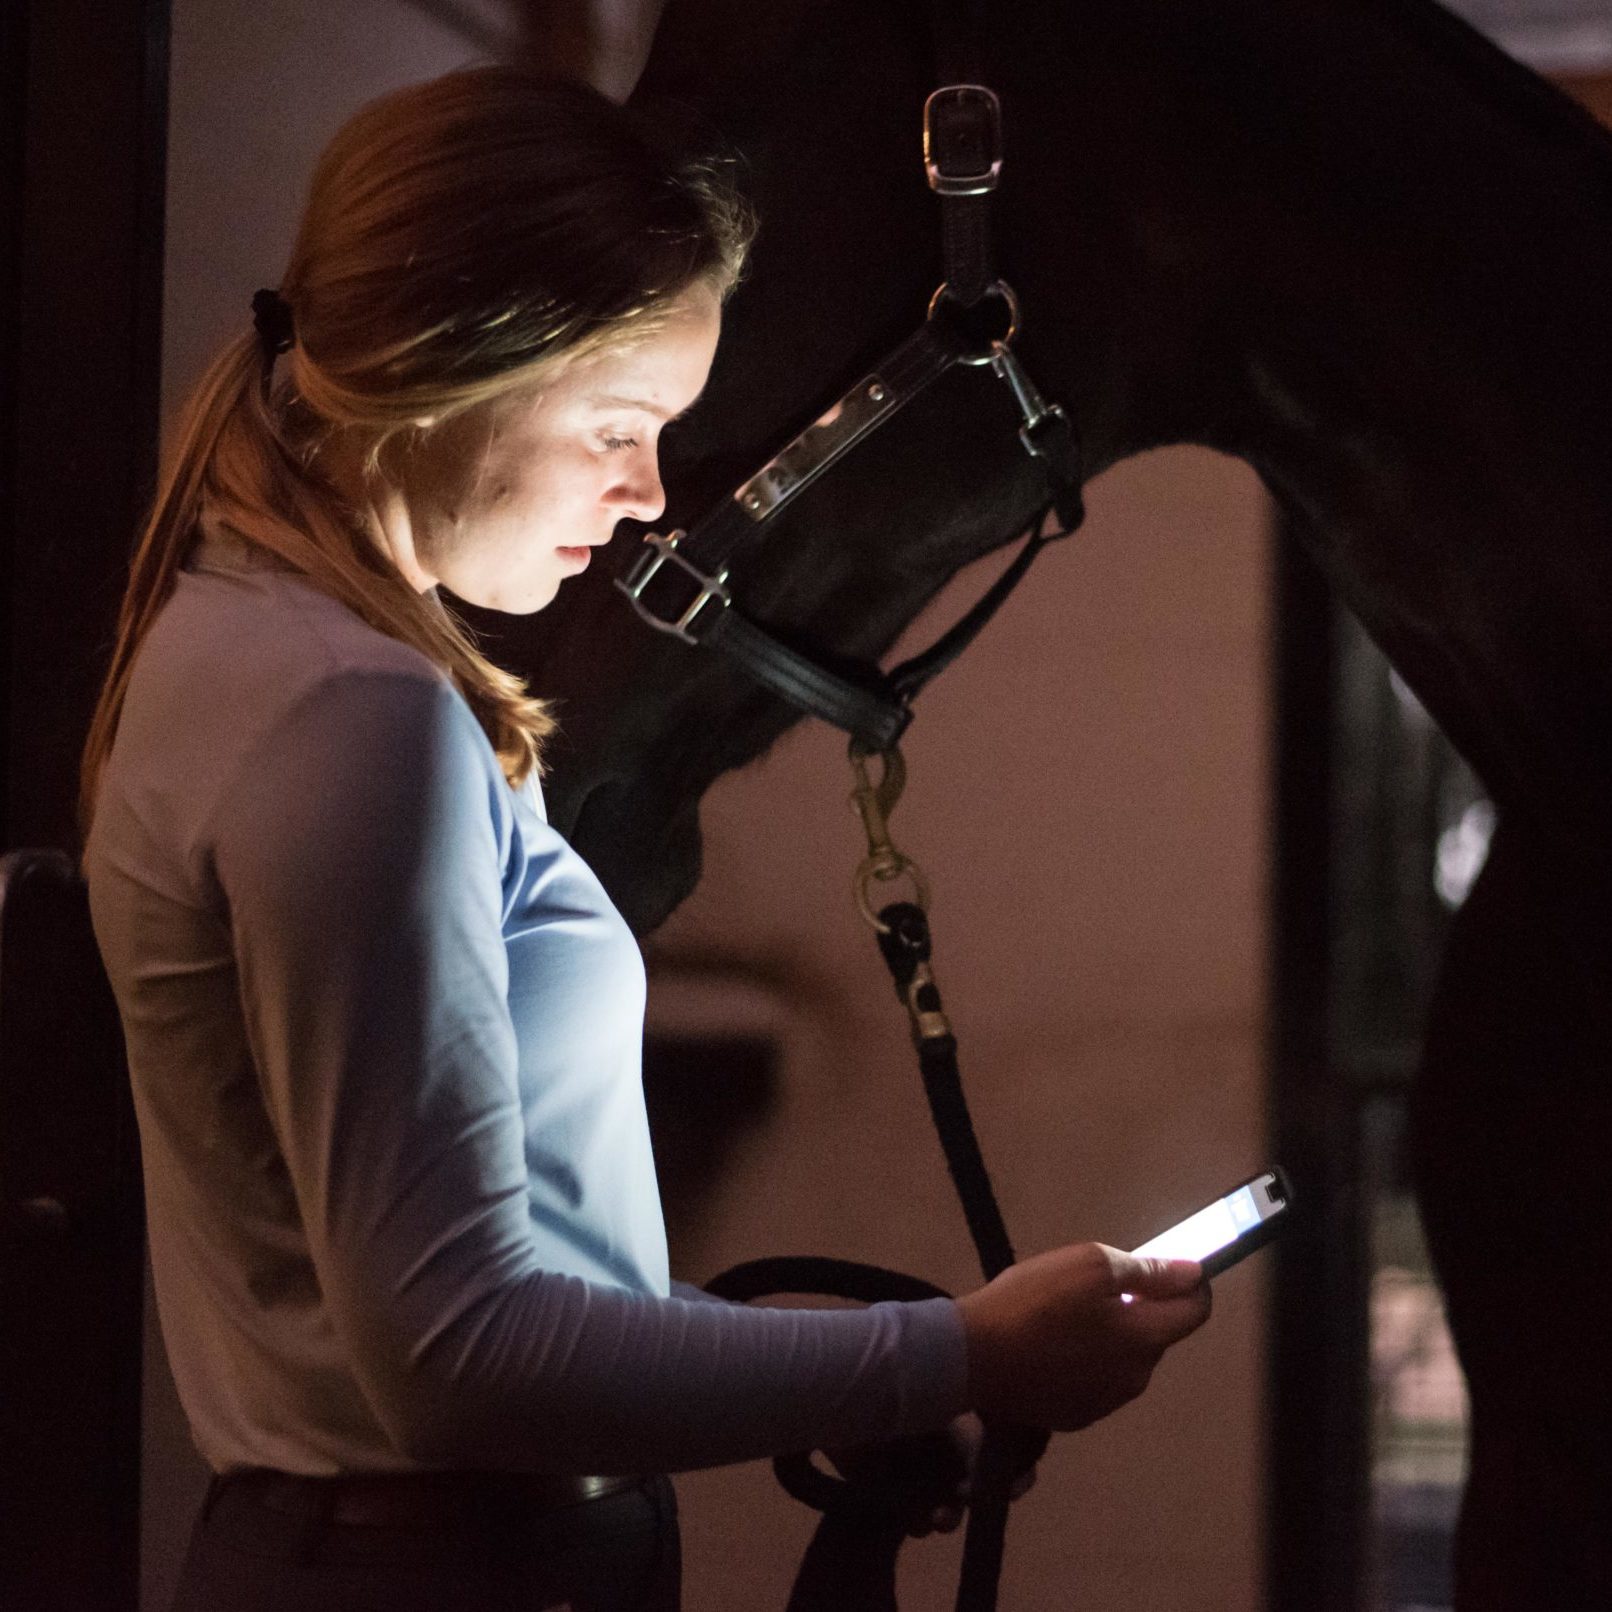 Equine entrepreneurs use task management software to keep their horse business organized.